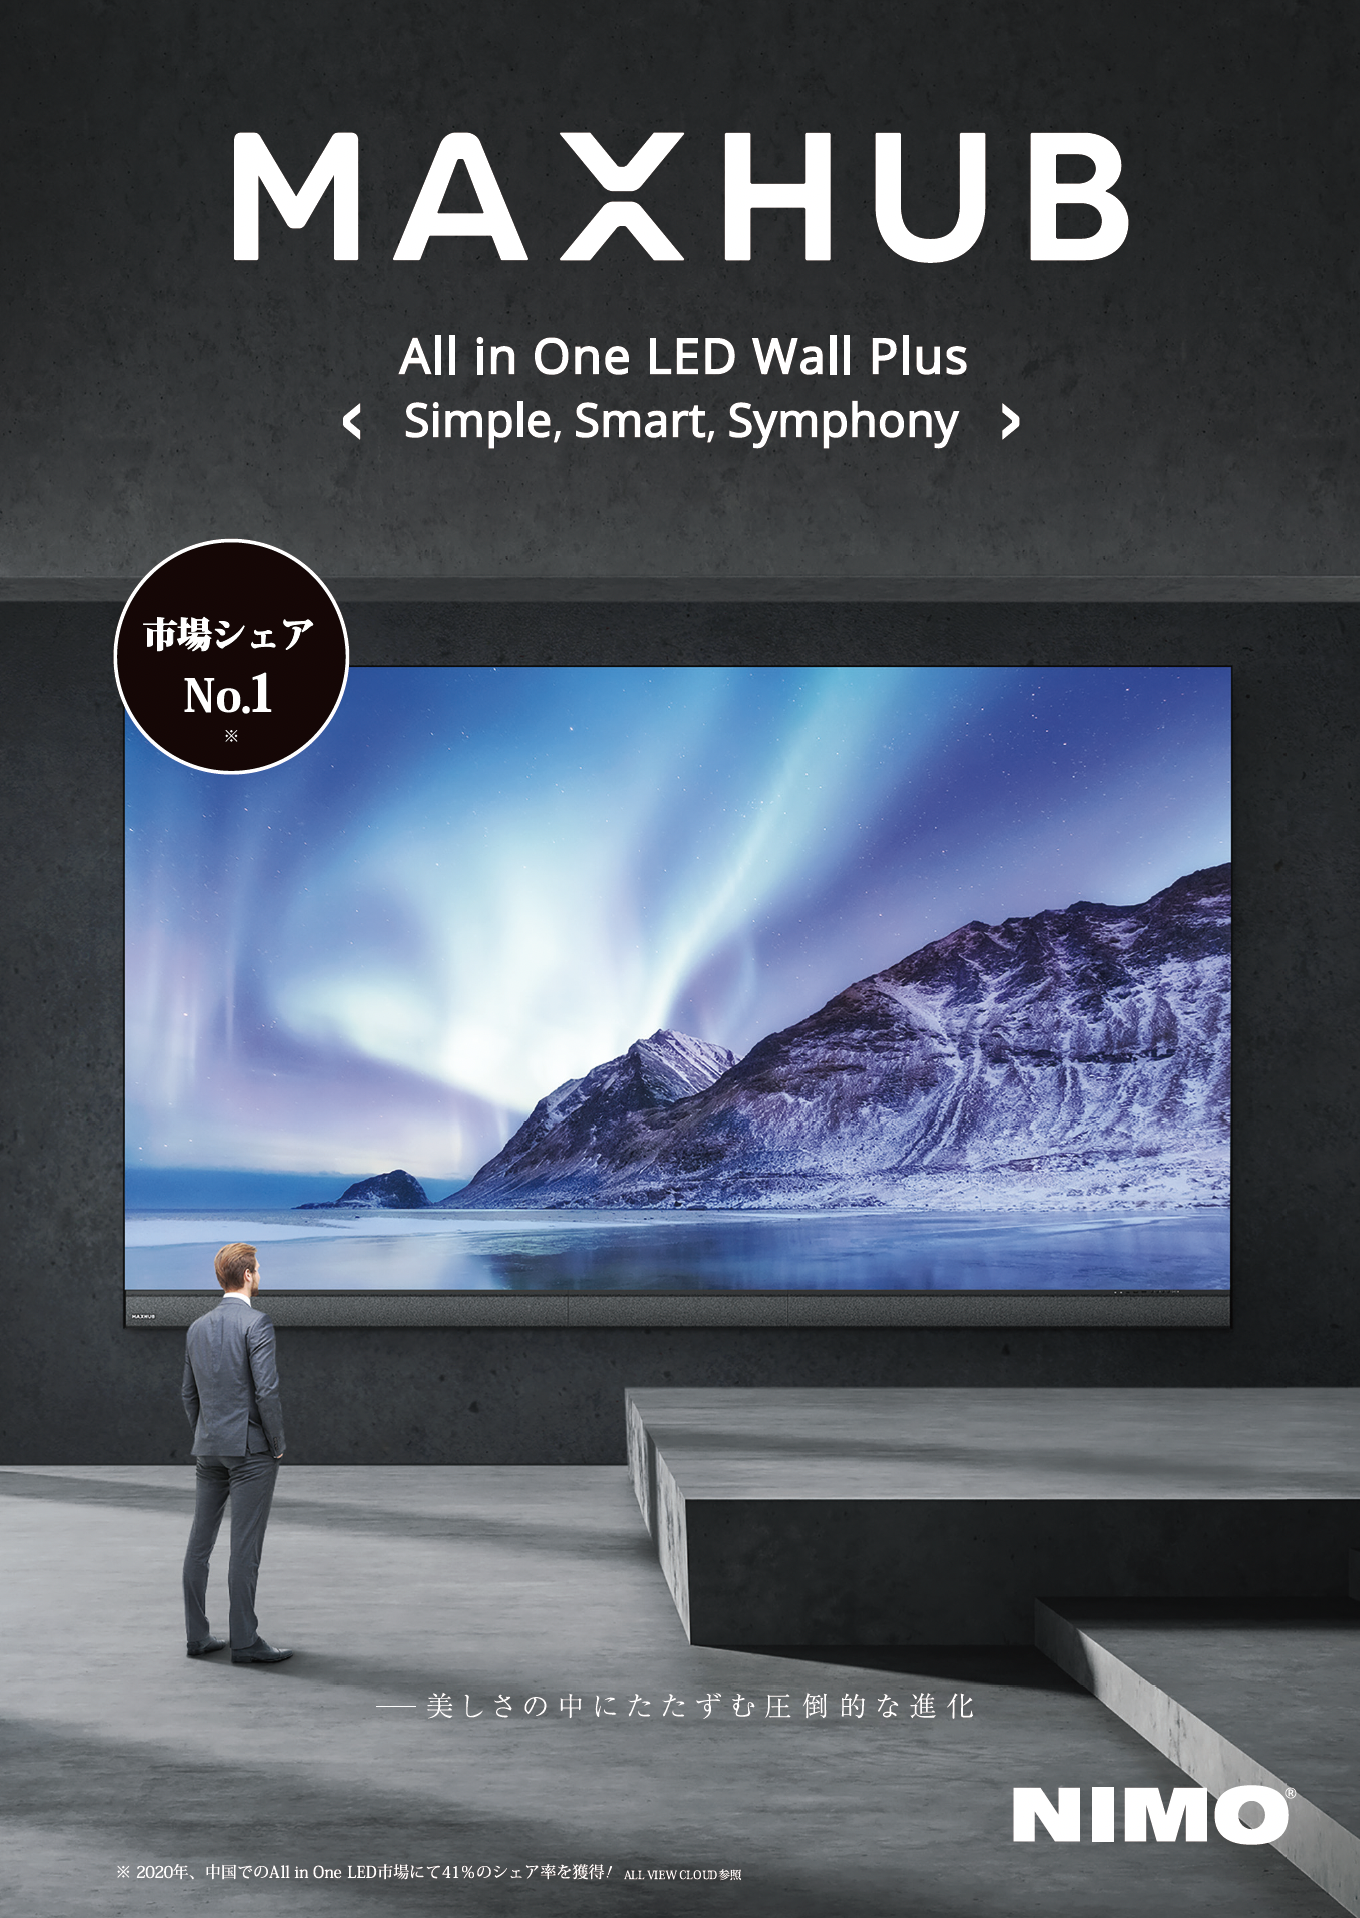 All in One LED Wall Plus